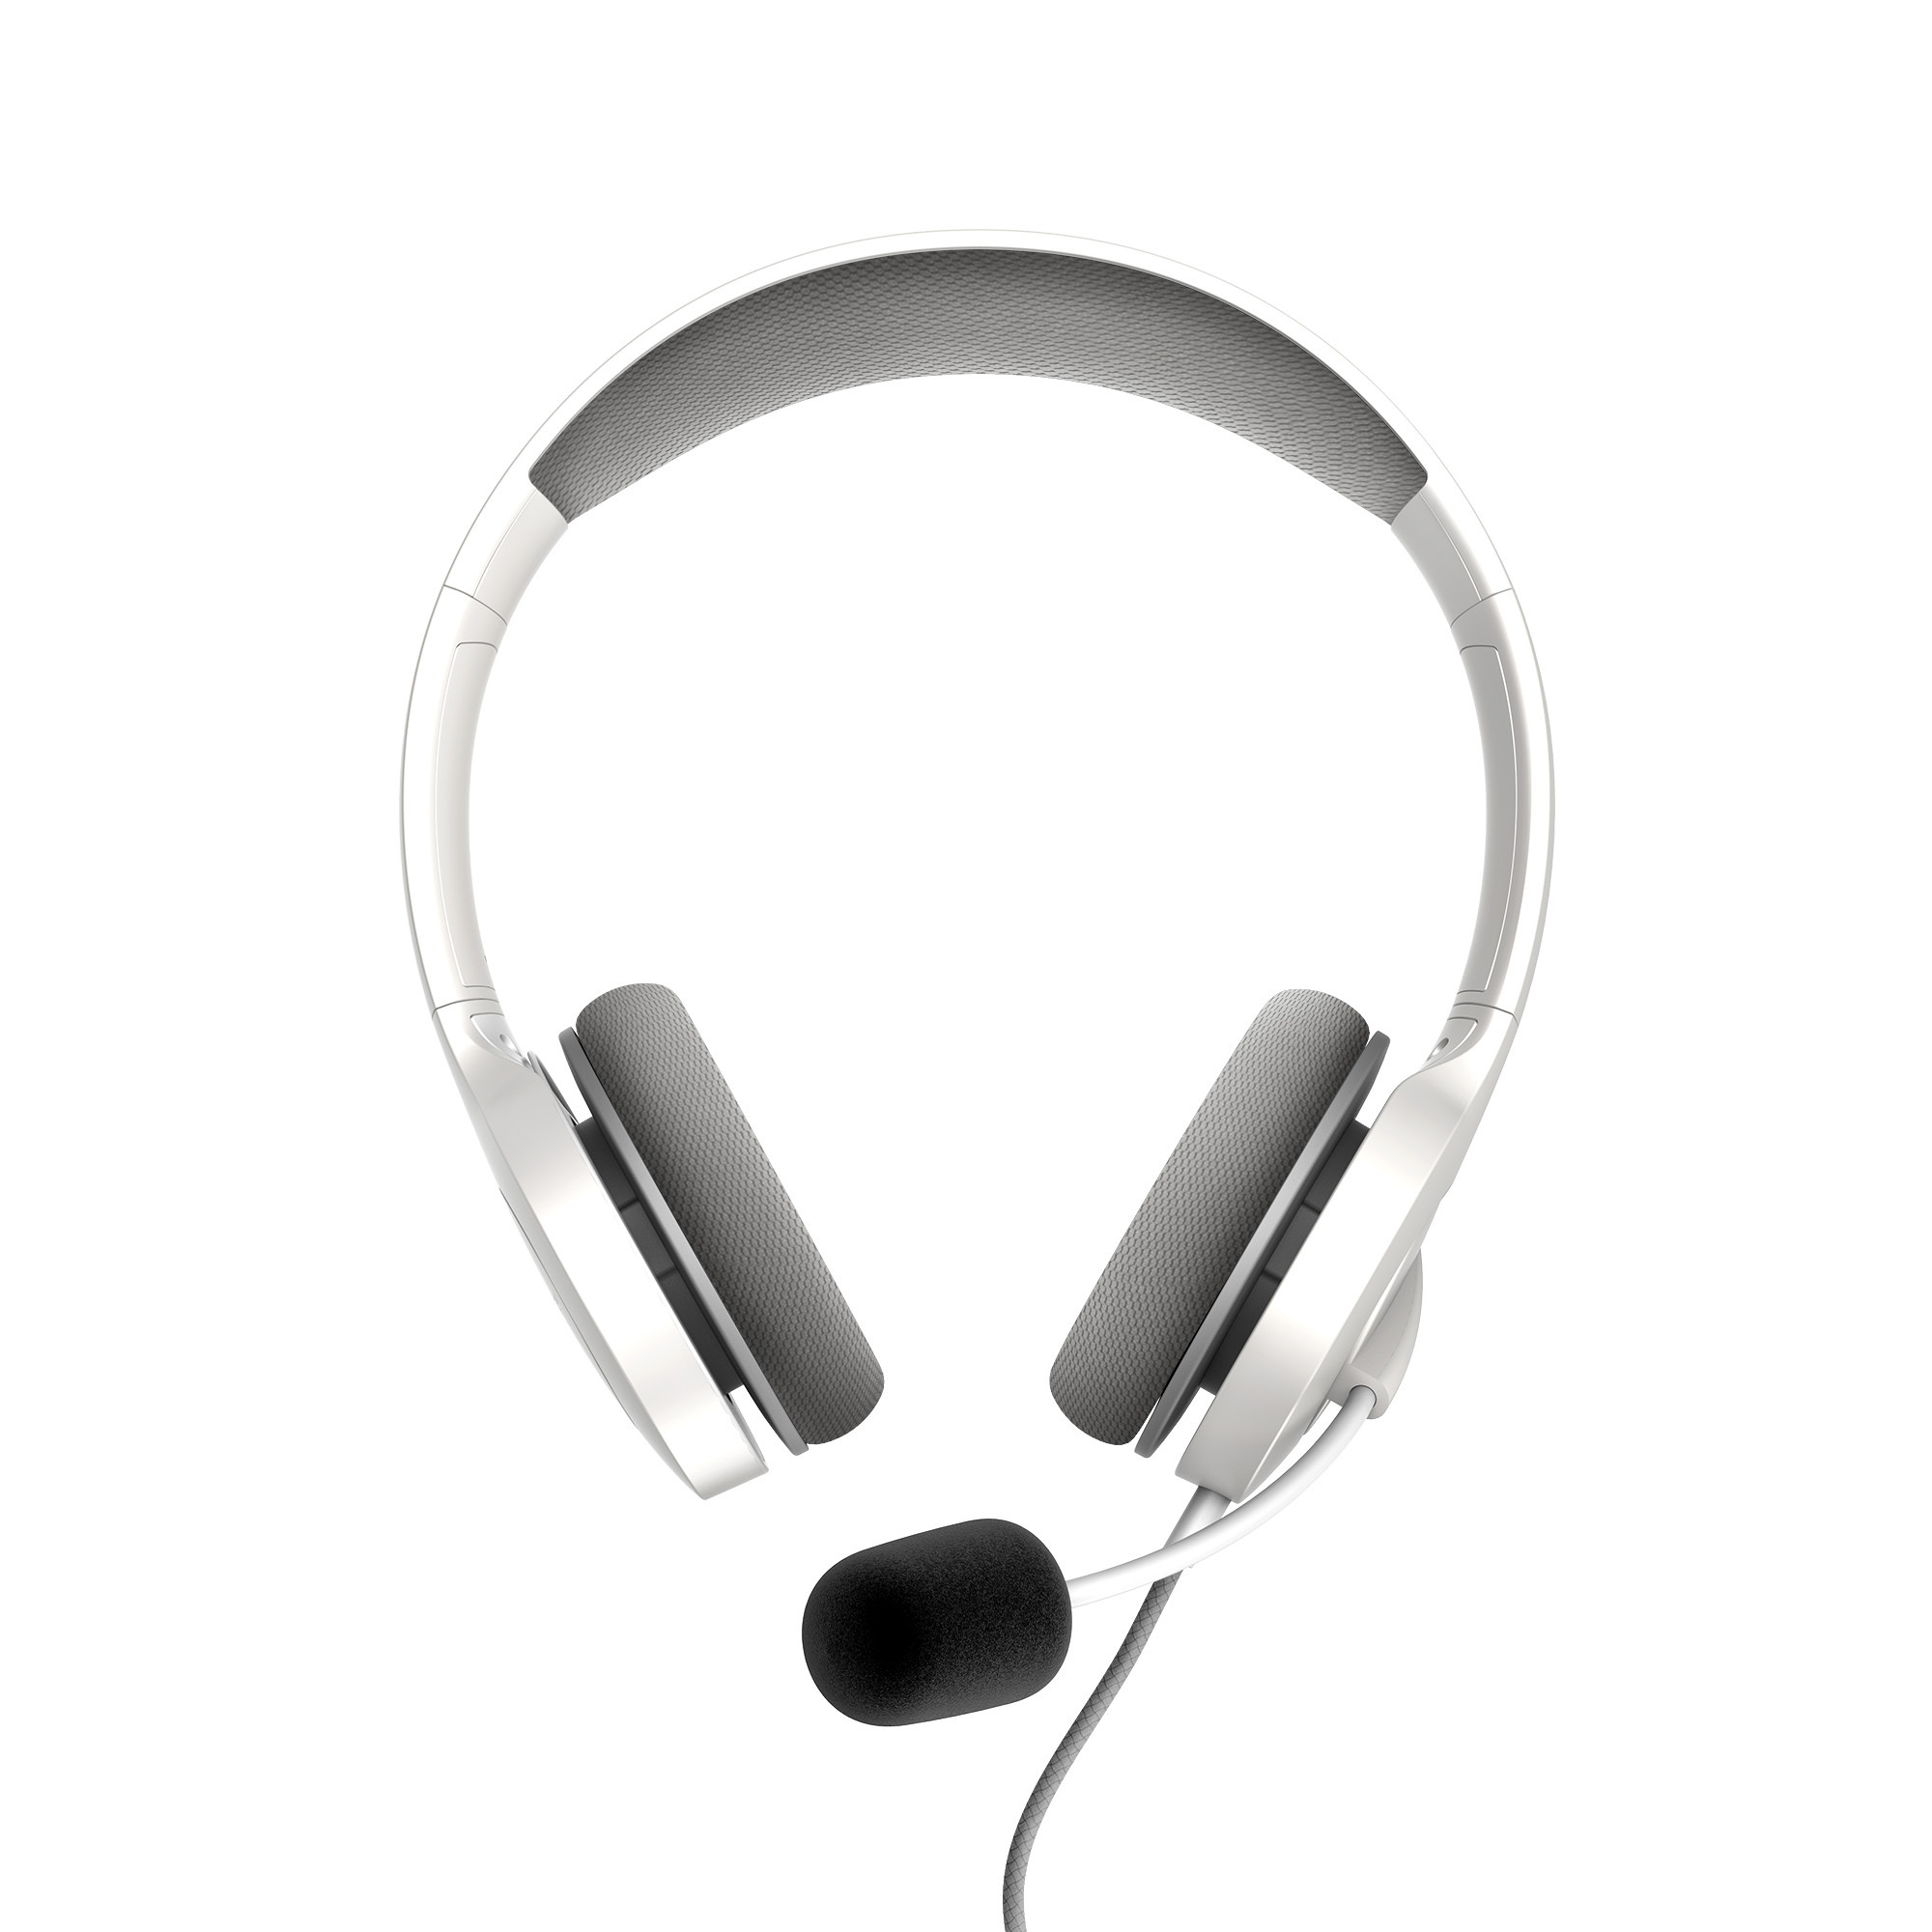 Headset with memory foam pads to make calls